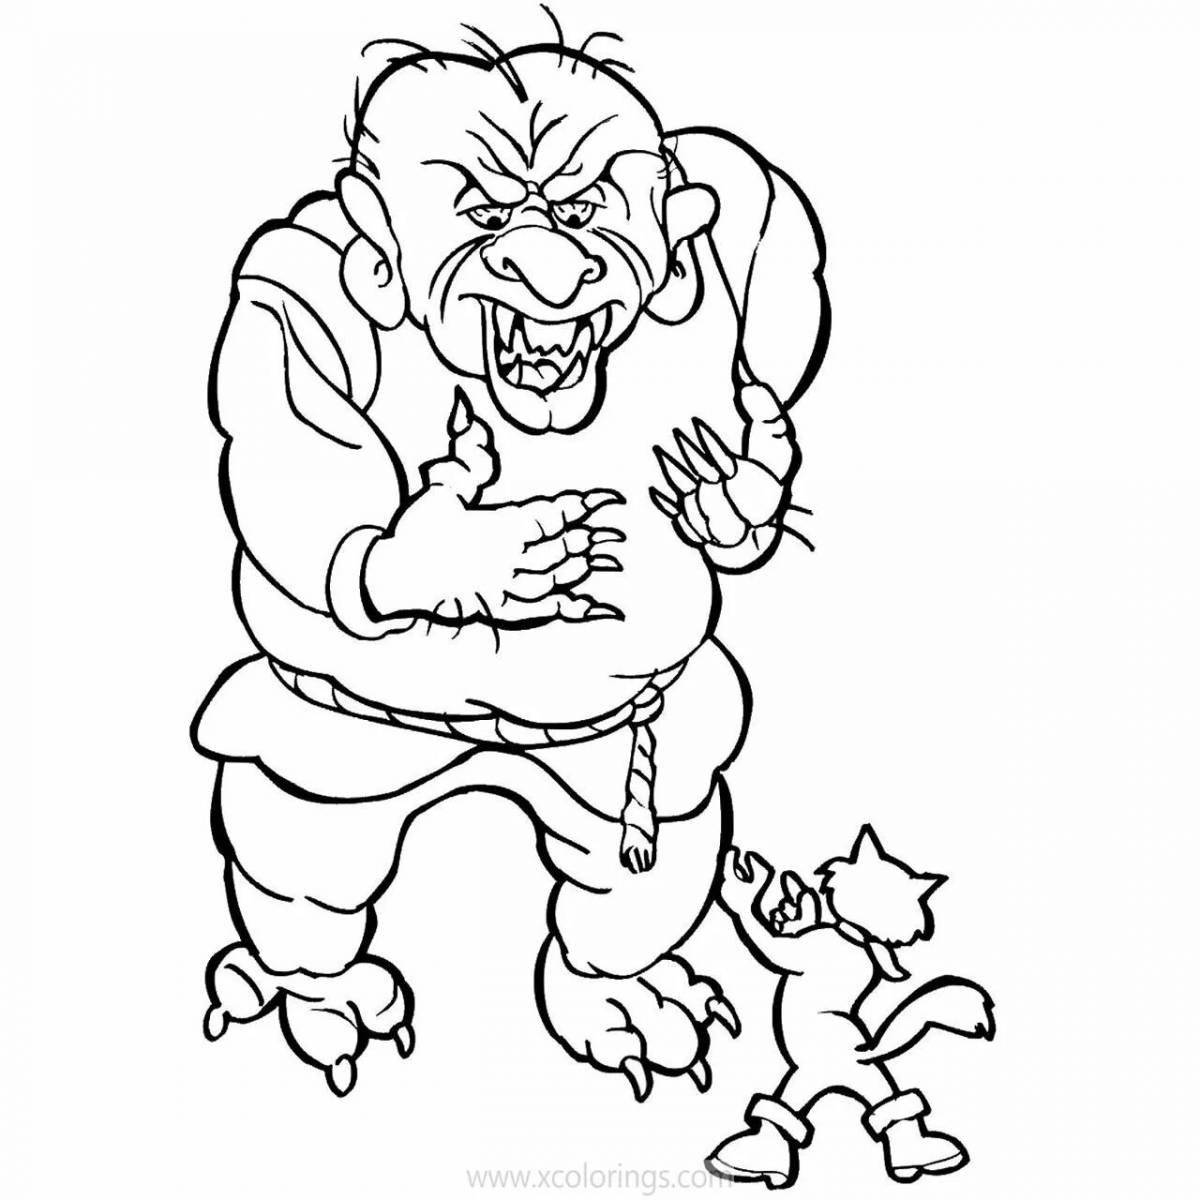 Glitter cannibal coloring page